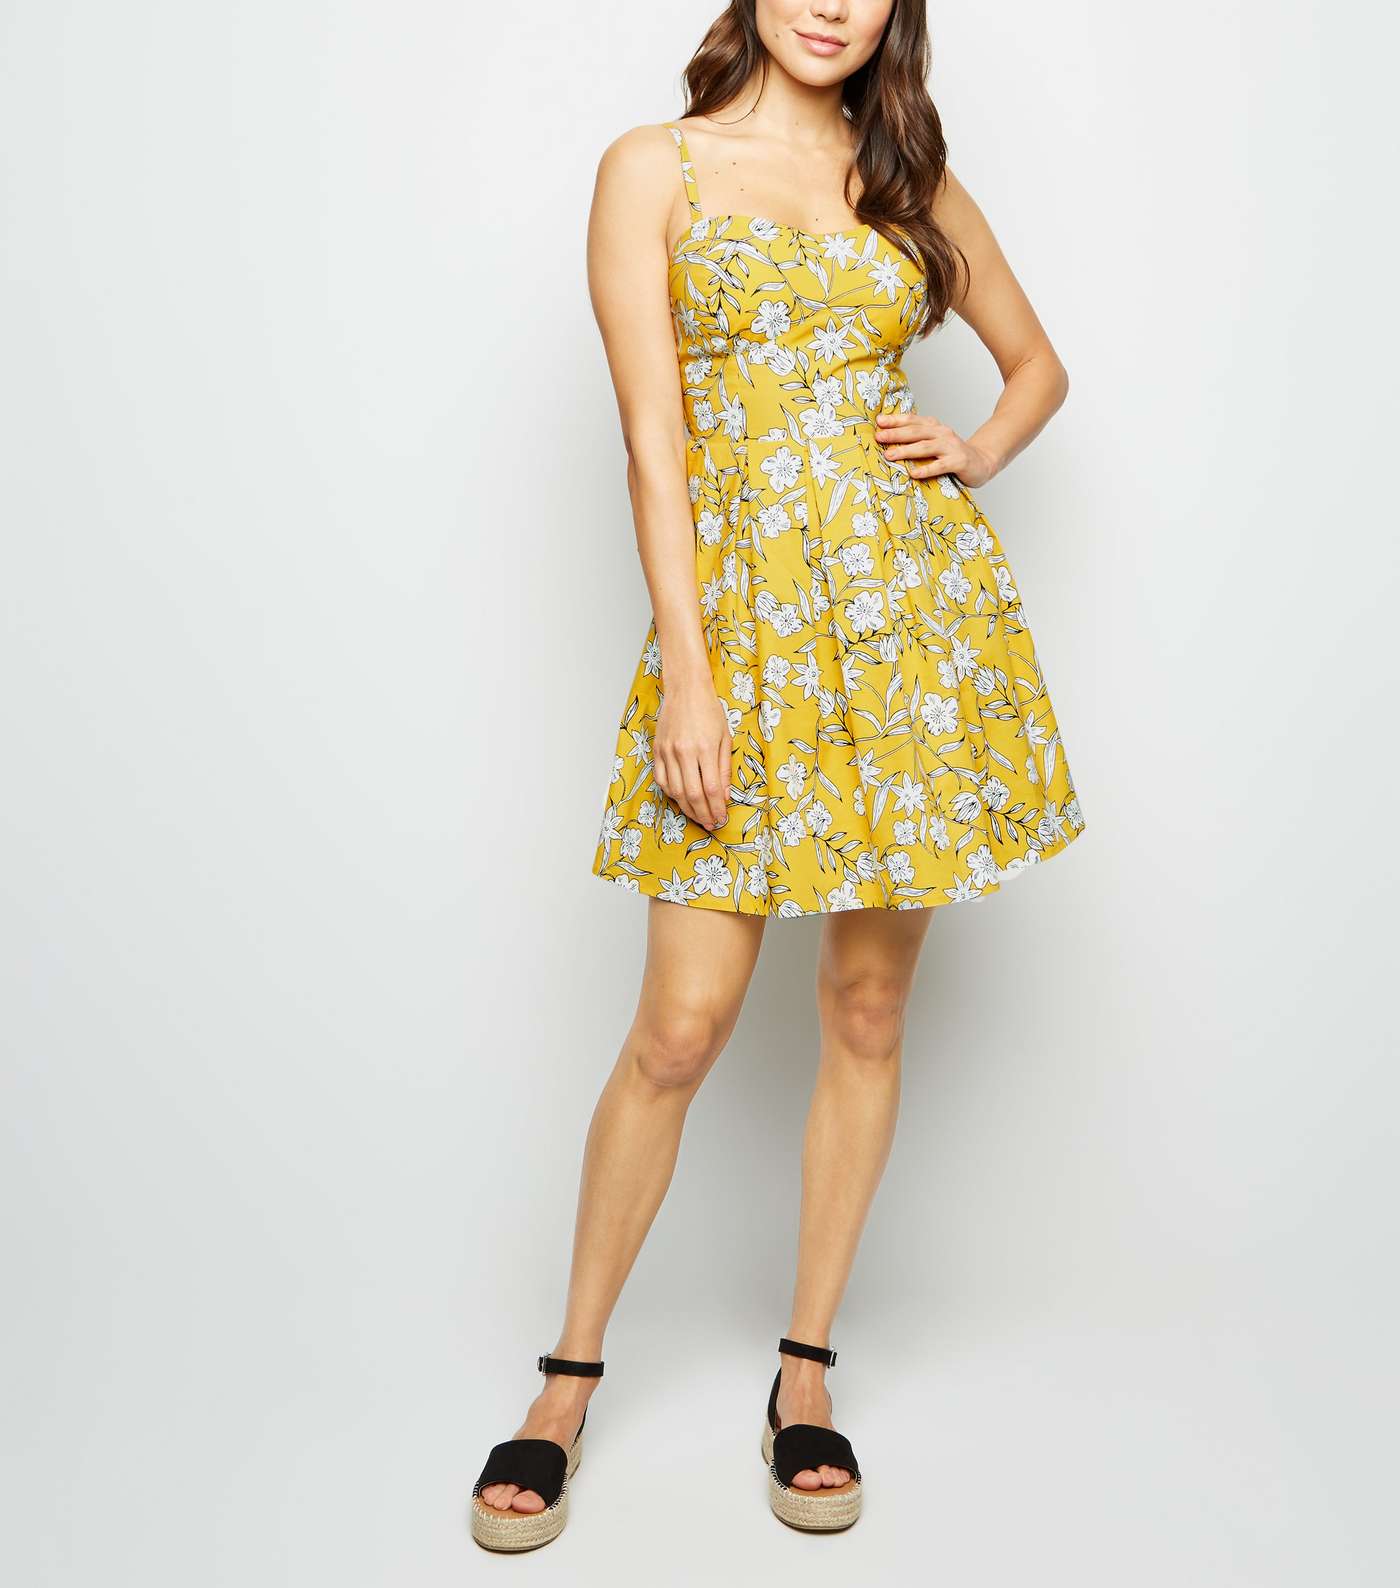 Cameo Rose Yellow Floral Bustier Dress Image 2